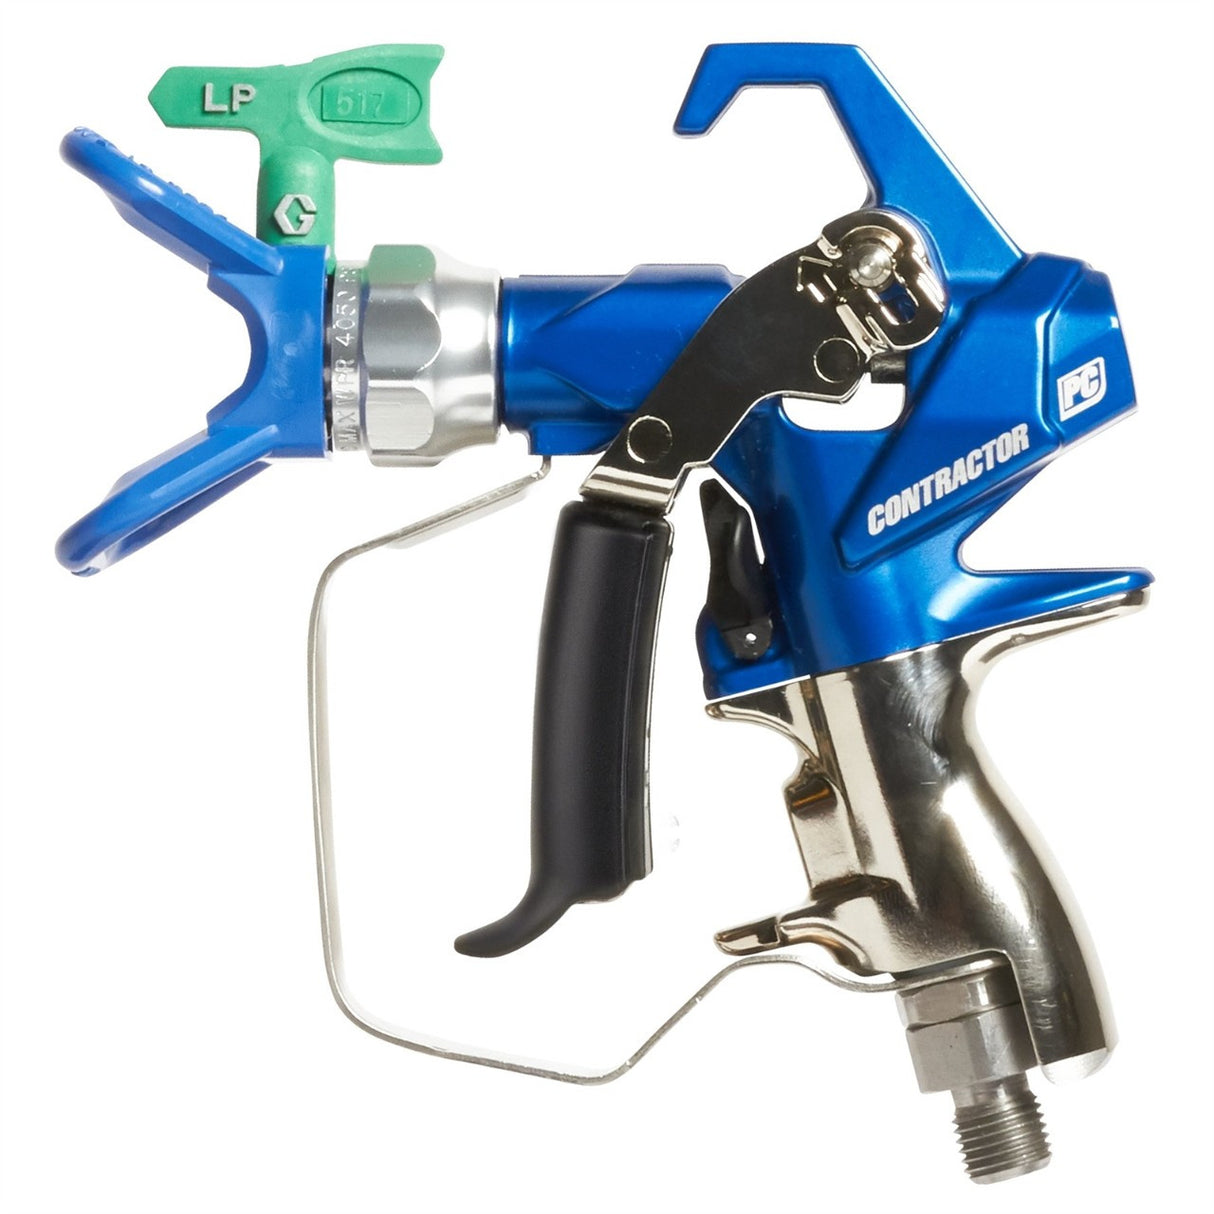 Graco Compact Contractor PC Spray Gun - Its Small, Its Light, Its Premium